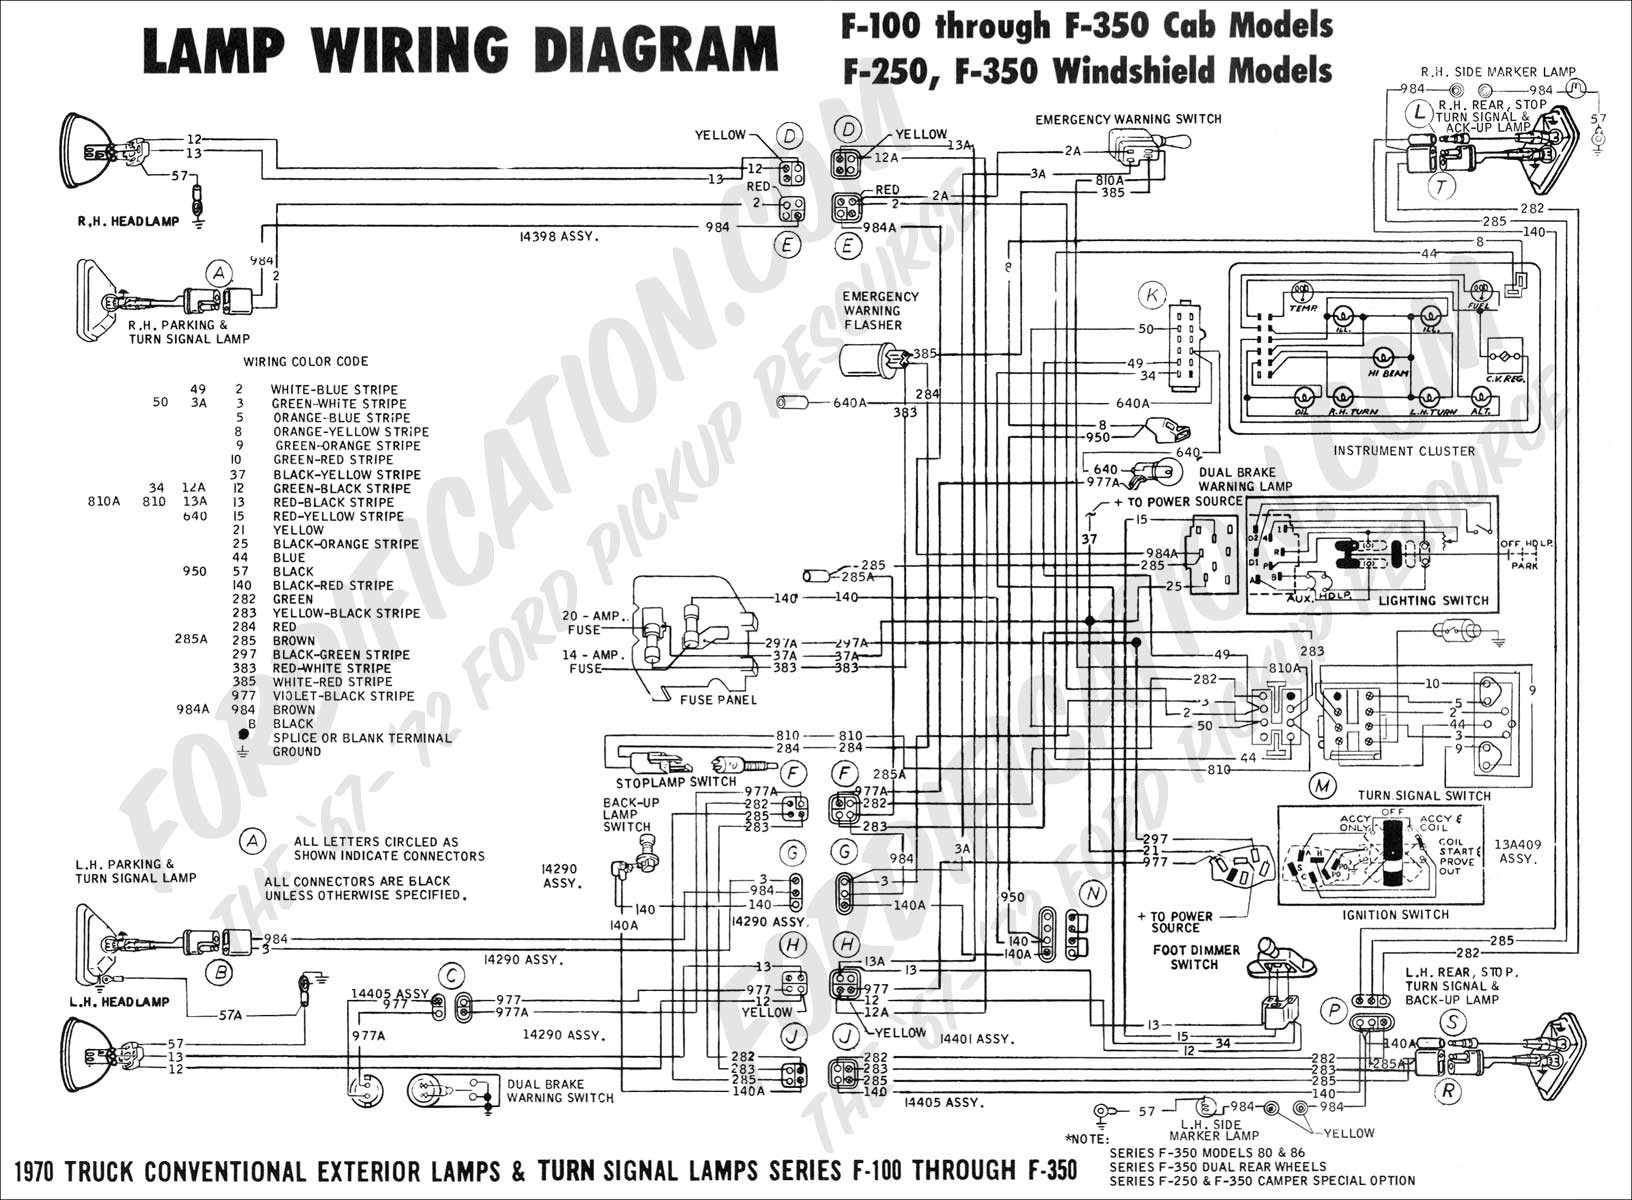 2007 ford Explorer Wiring Diagram ford F700 Wiring Diagrams Additionally Dodge Under Hood Wiring Of 2007 ford Explorer Wiring Diagram